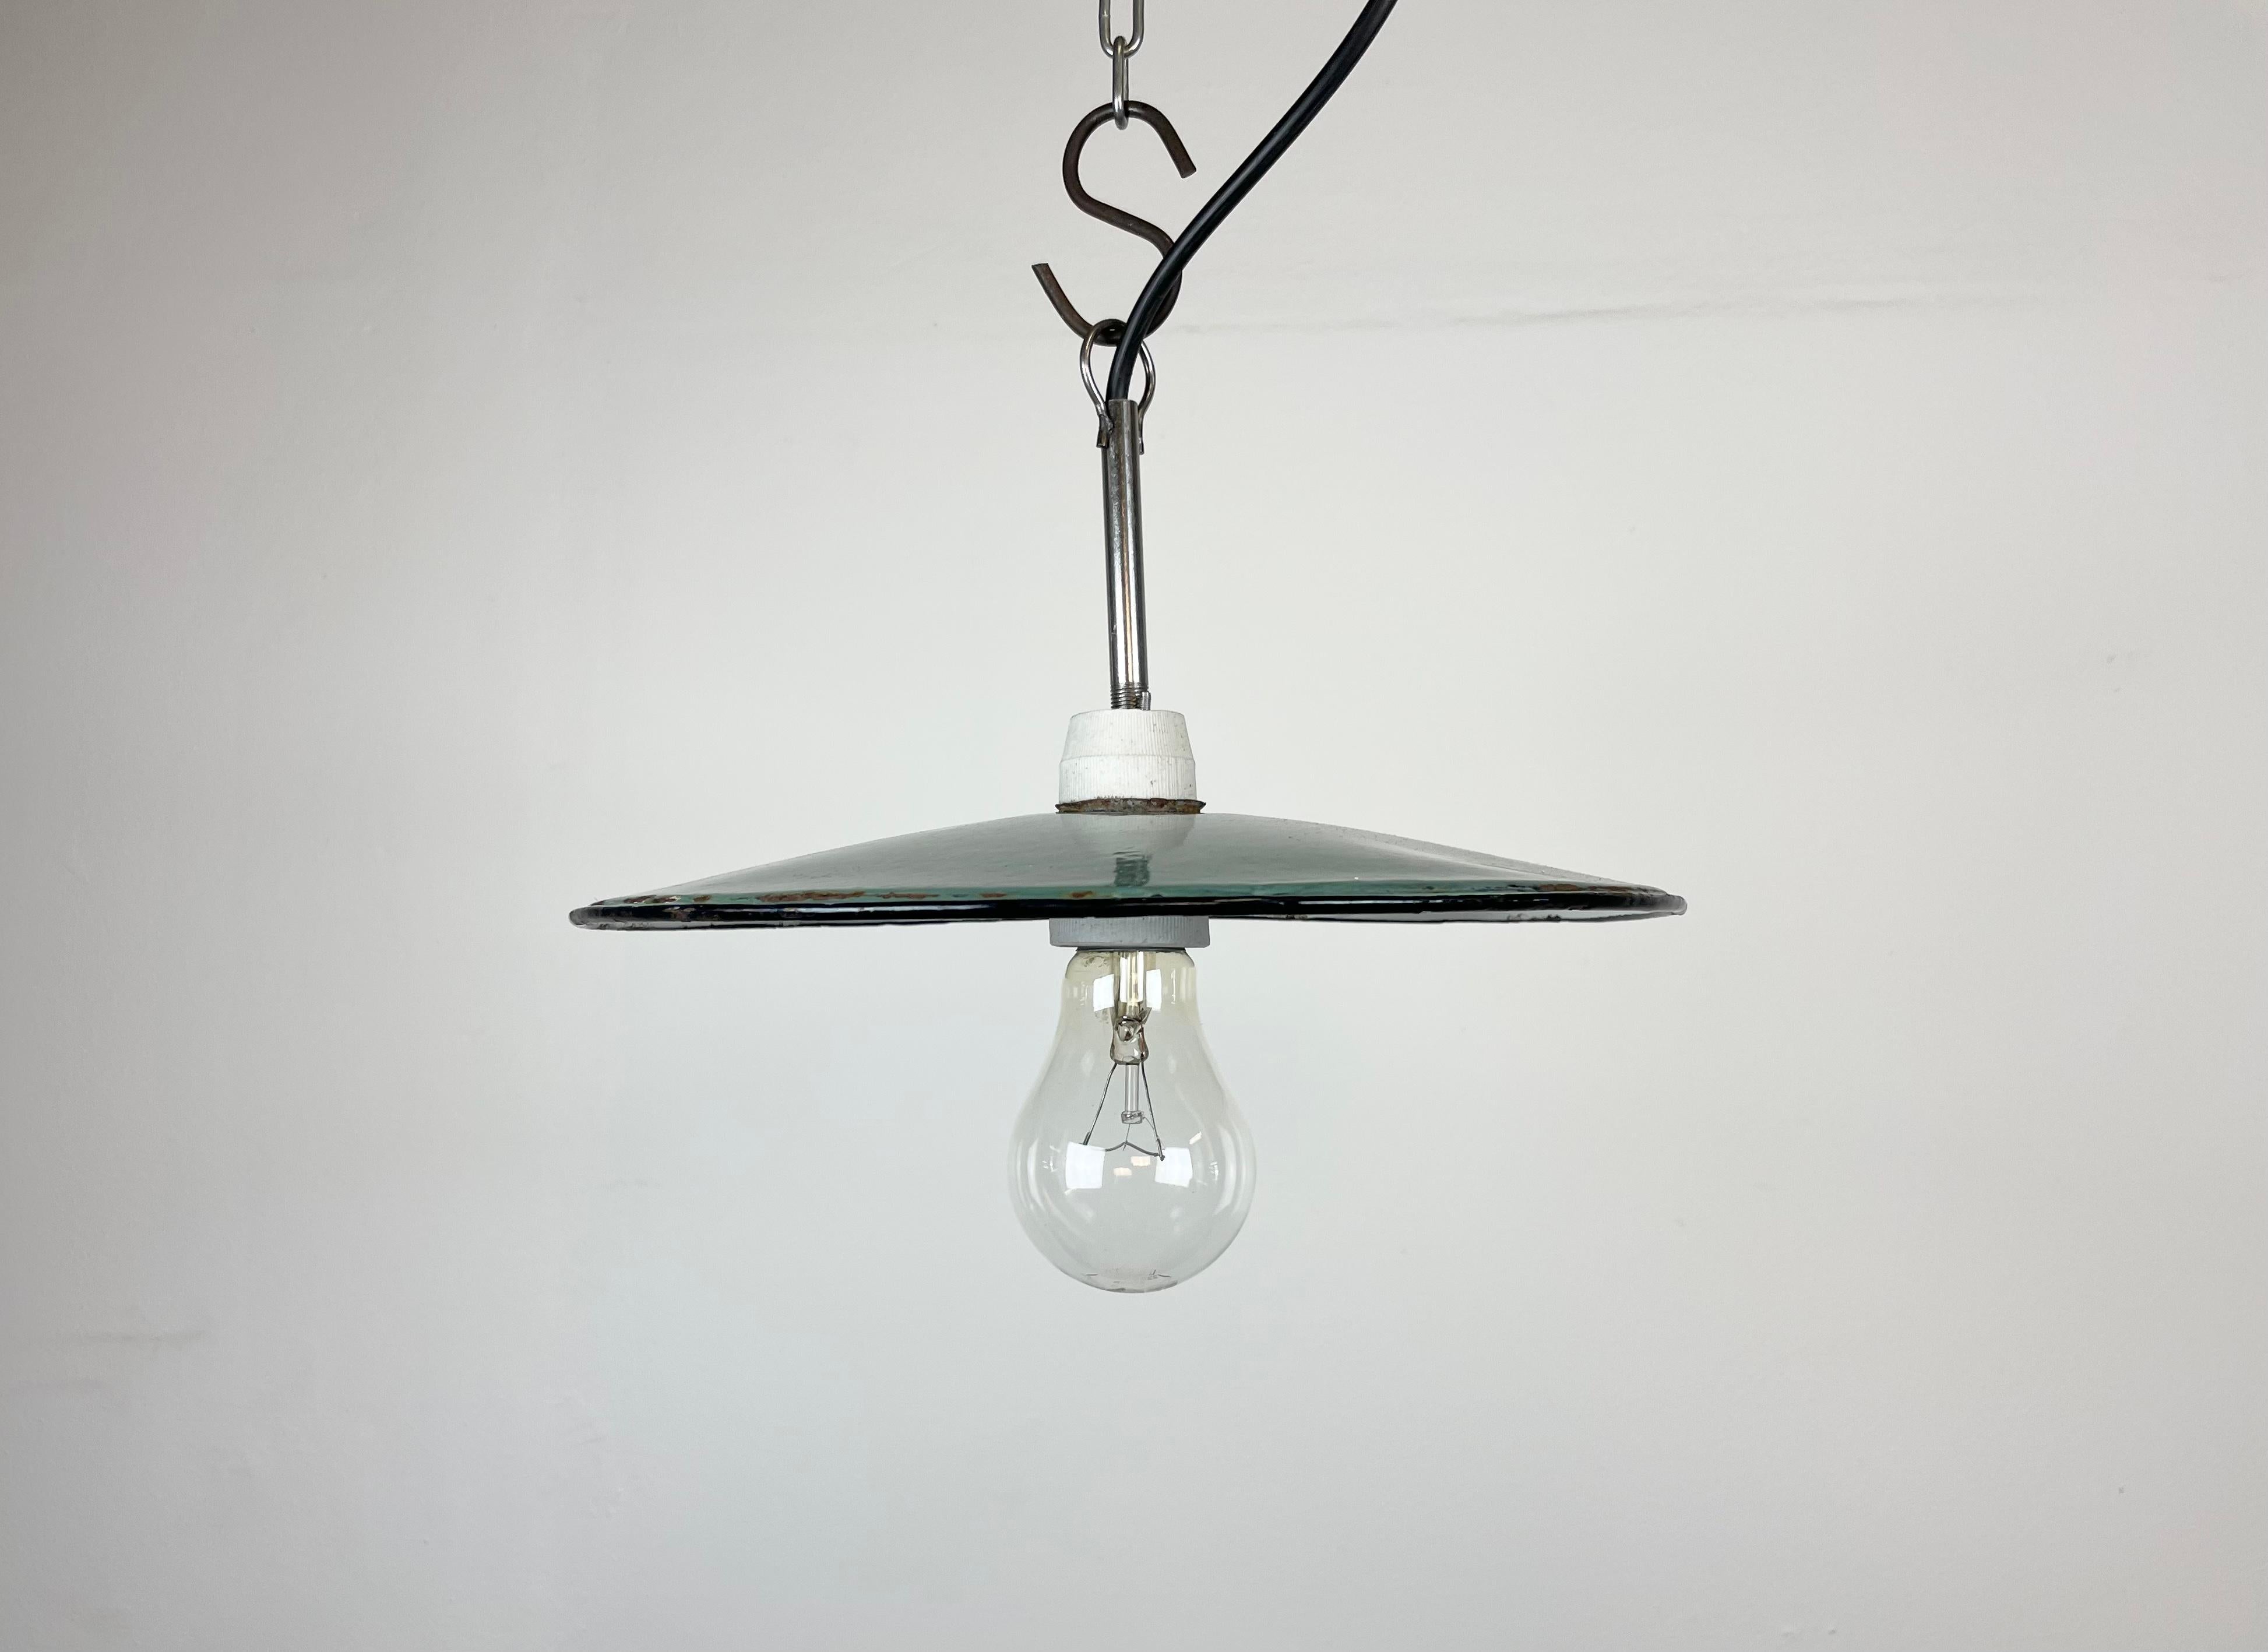 Vintage industrial enamel pendant lamp made in Poland during the 1970s. It features a petrol enamel shade with white enamel interior and iron top. The socket requires E 27 light bulbs. The weight of the lamp is 0,4 kg. New wire.